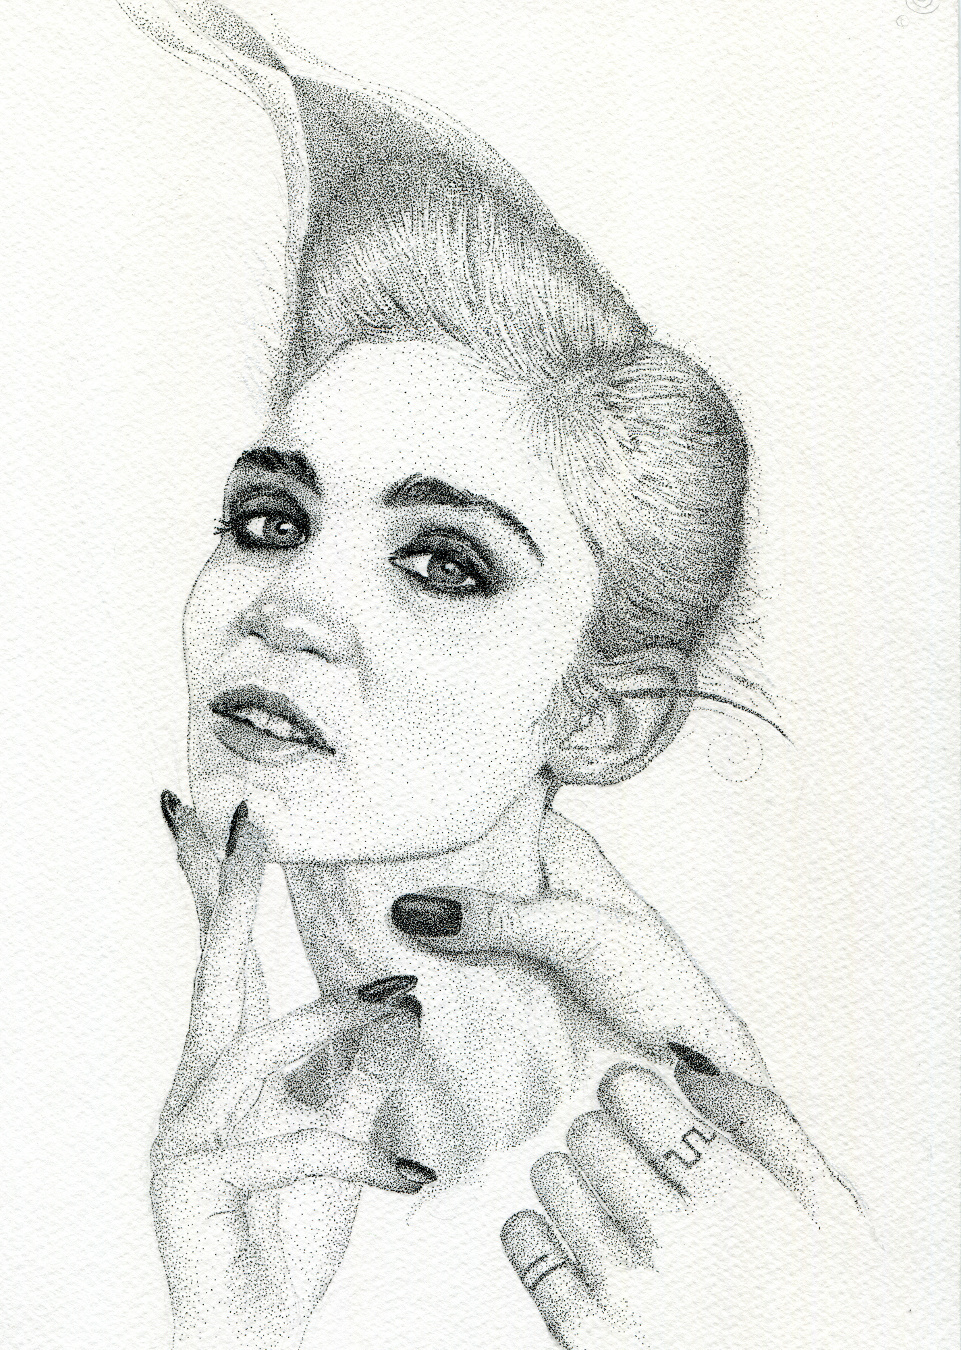 grimes claire boucher claire Boucher stippling ink inkdrawing pen pendrawing